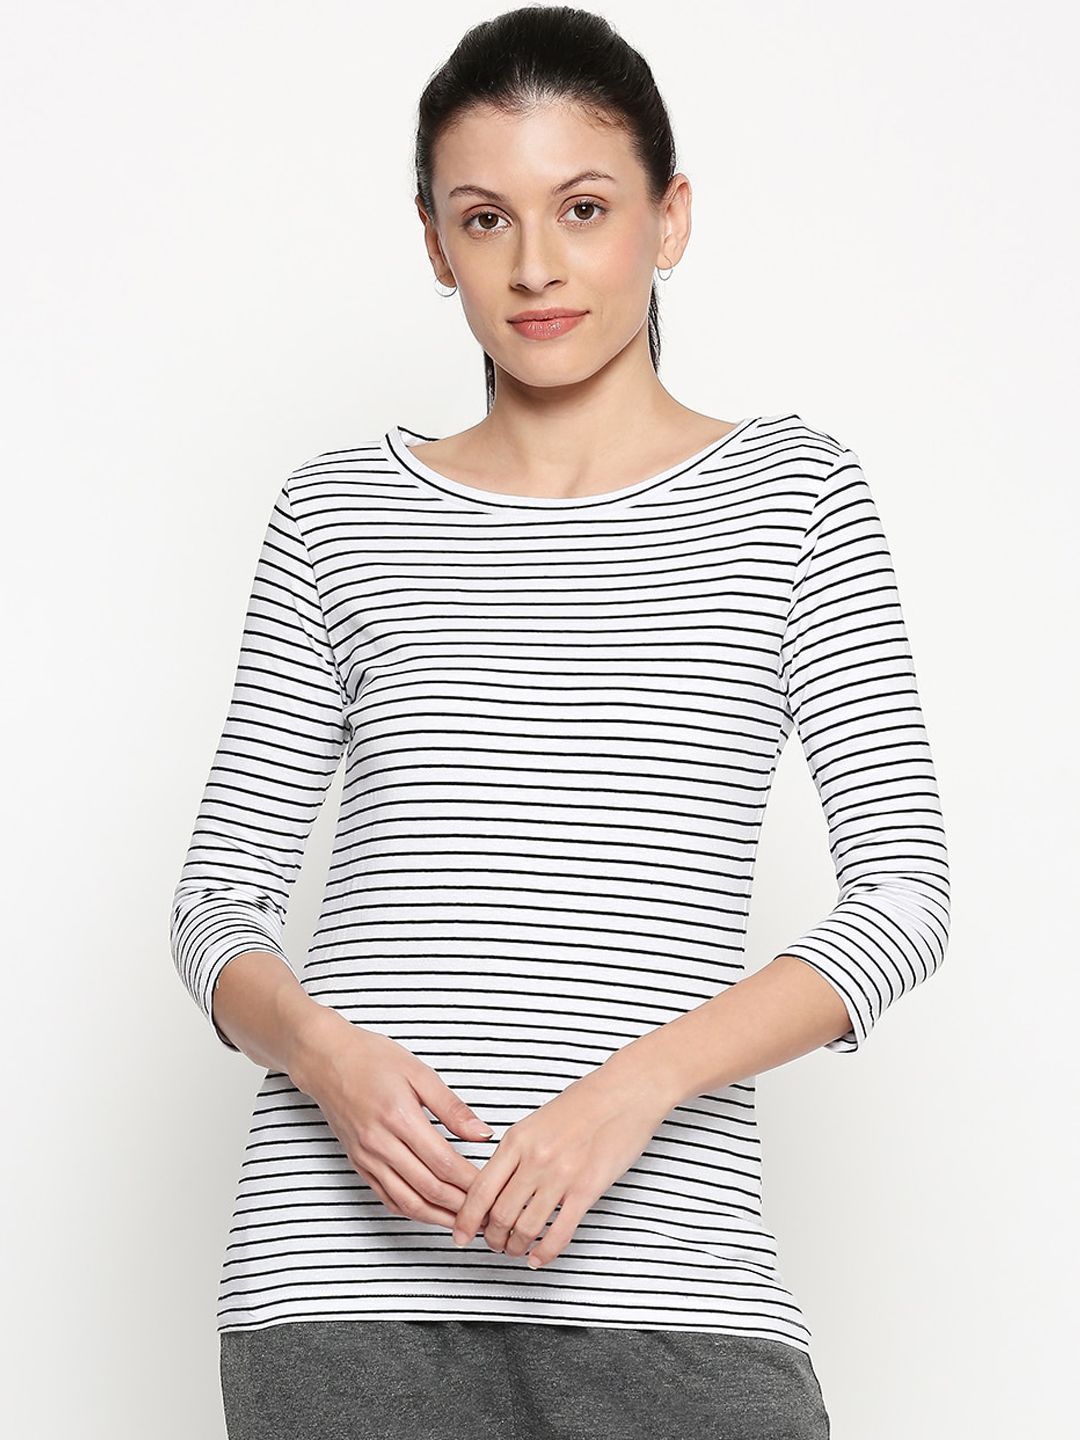 Dreamz by Pantaloons Women White Striped Pure Cotton Lounge tshirt Price in India